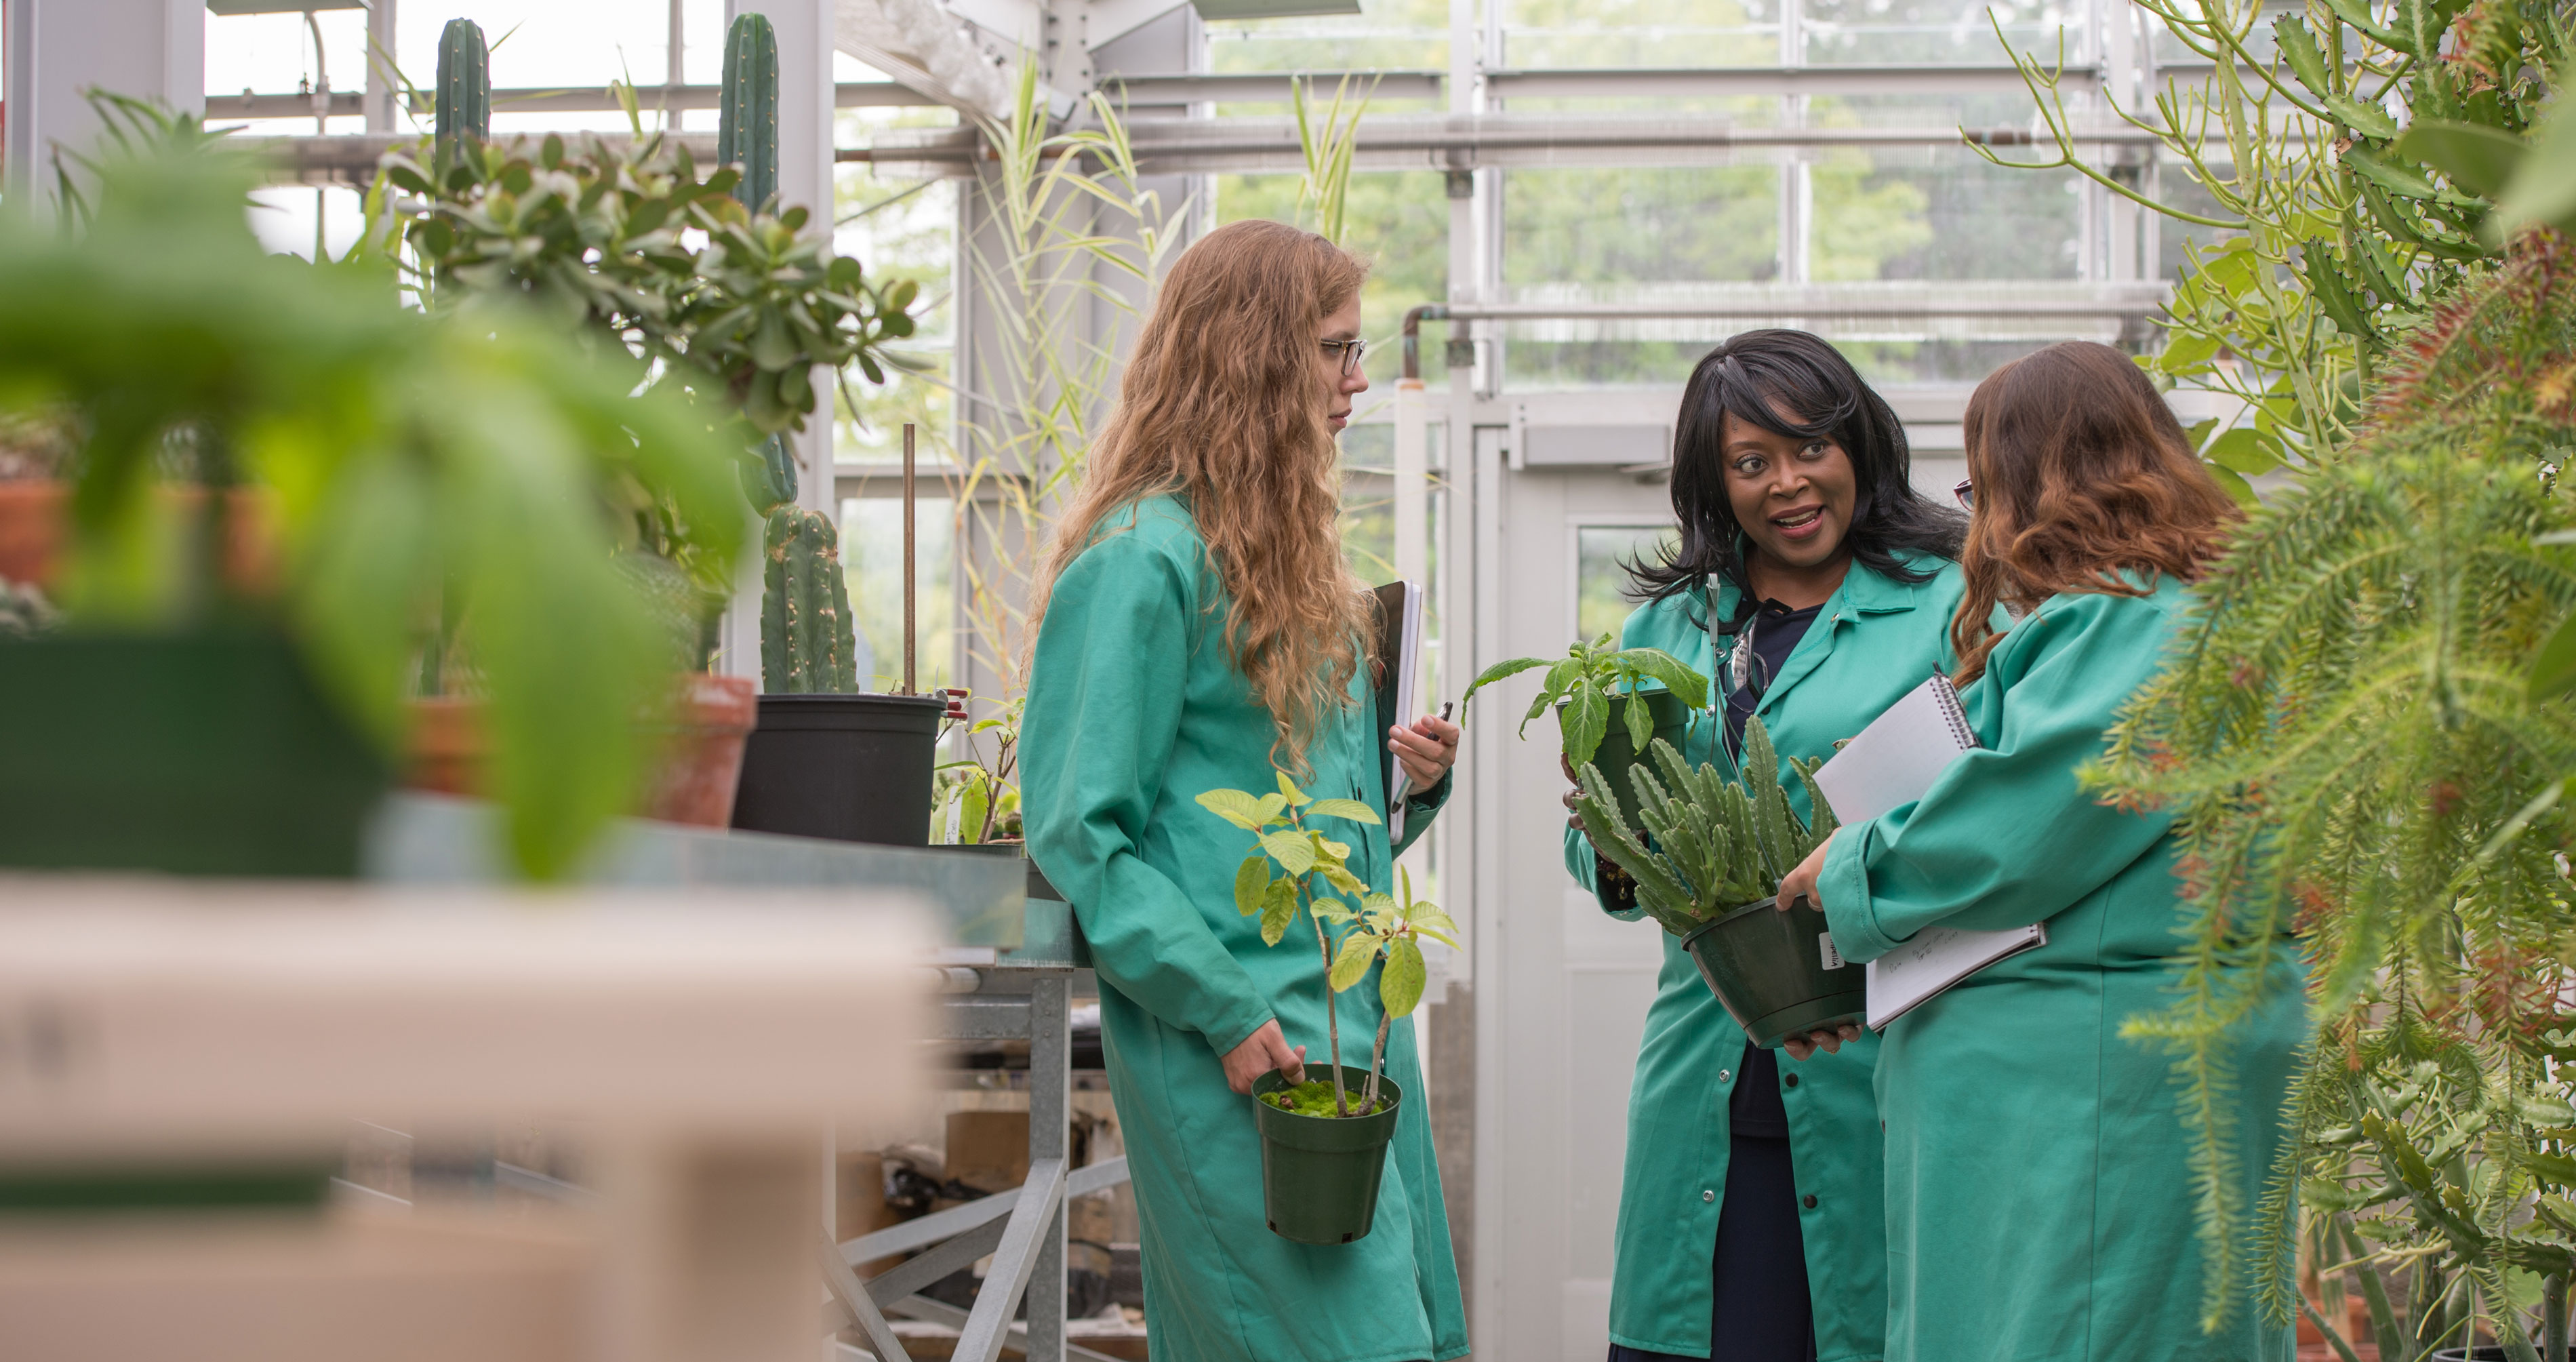 Three women in green lab coats holding plants and notebooks talk inside a greenhouse.